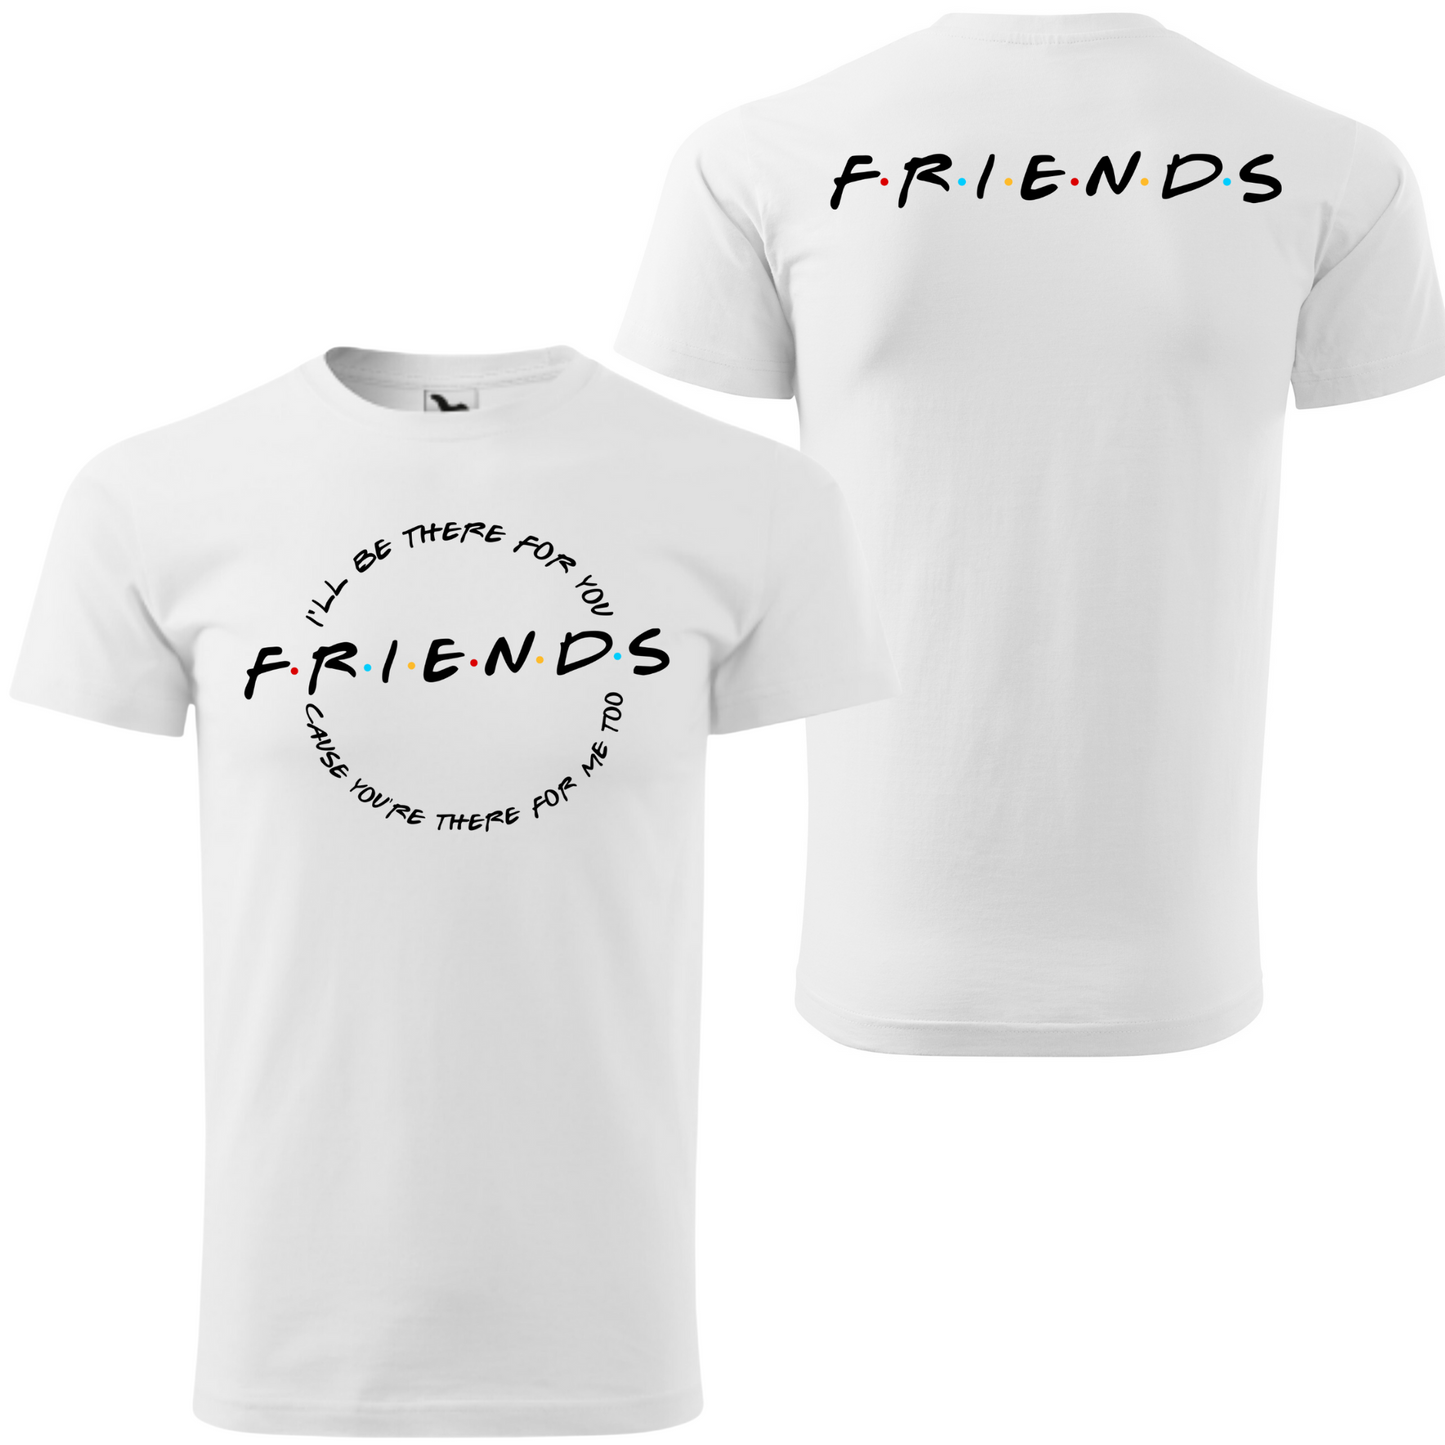 Tricou personalizat barbat - I'll Be There For You